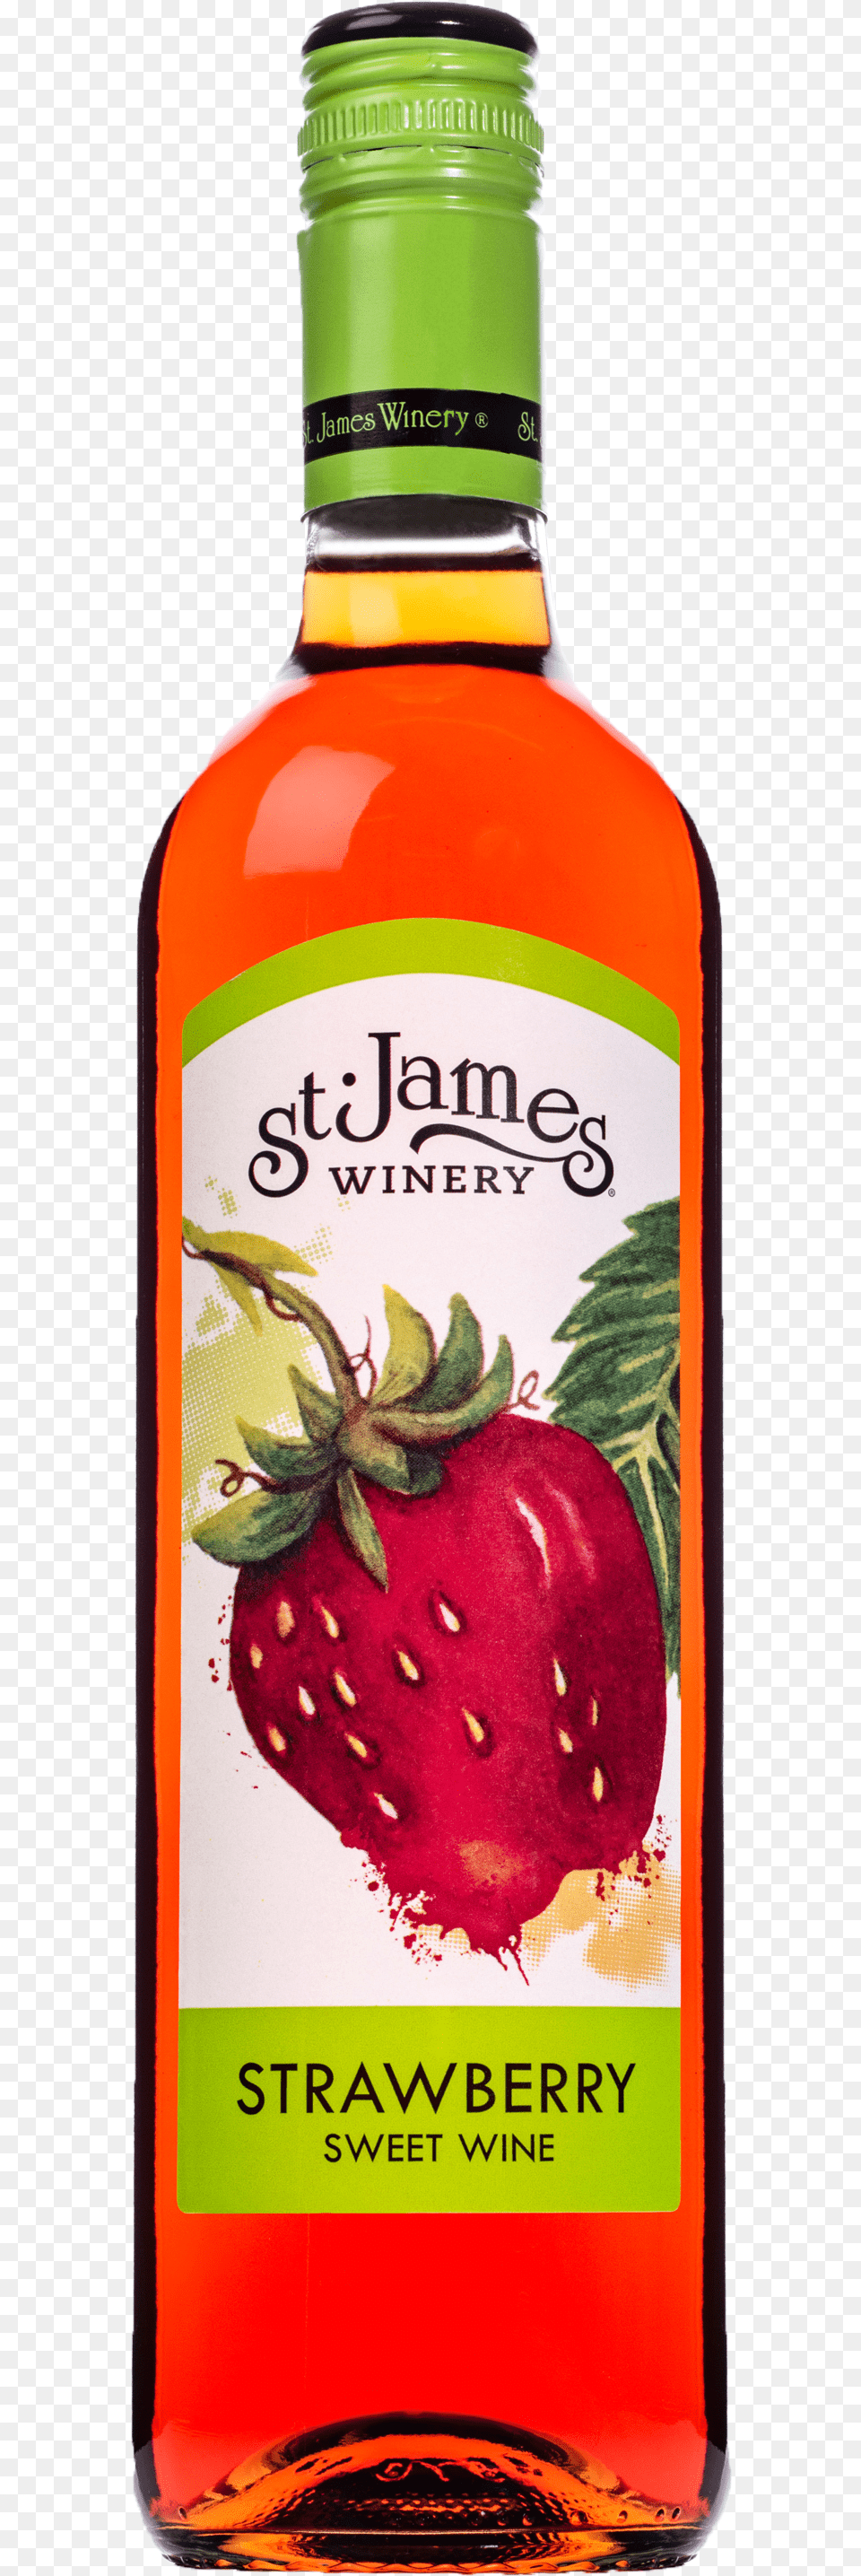 St James Winery Strawberry Wine, Fruit, Produce, Berry, Plant Png Image